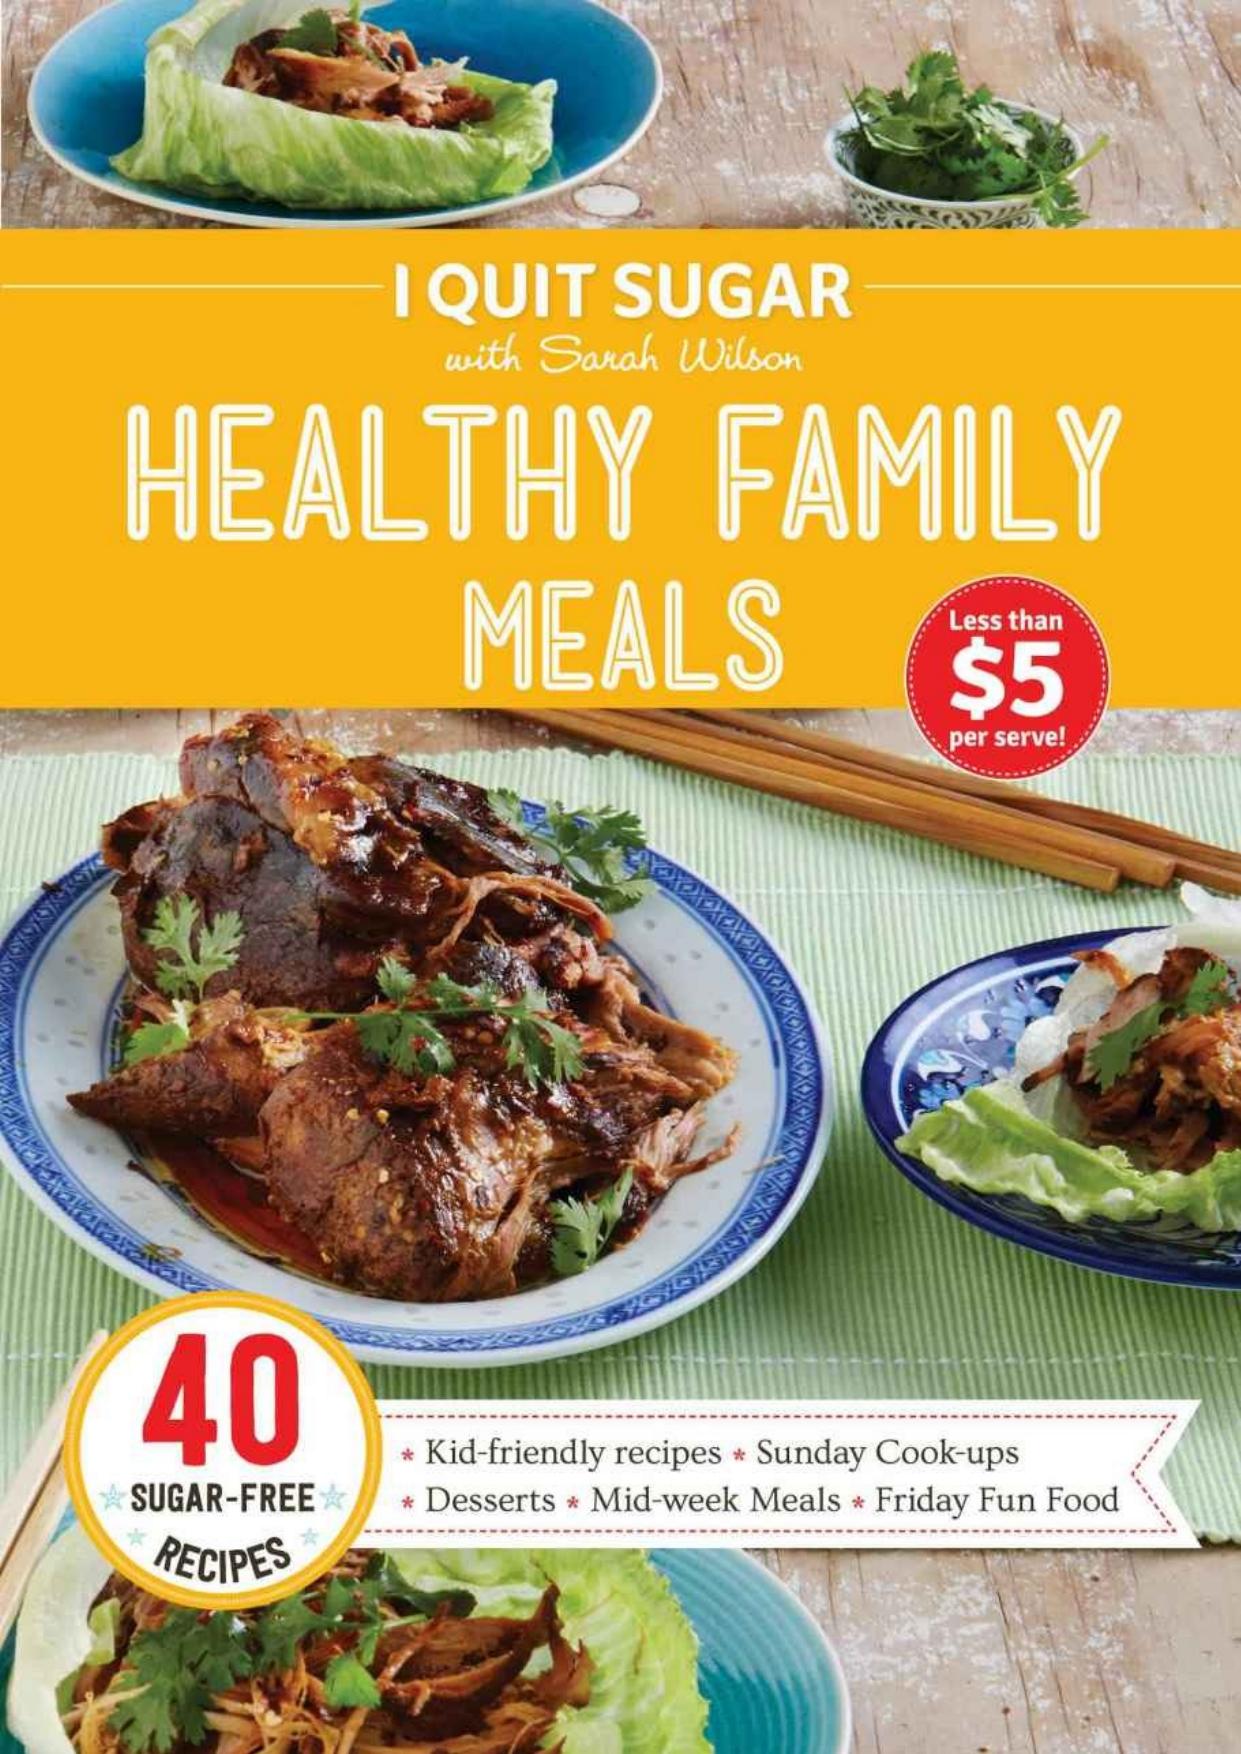 I Quit Sugar Healthy Family Meals by Sarah Wilson